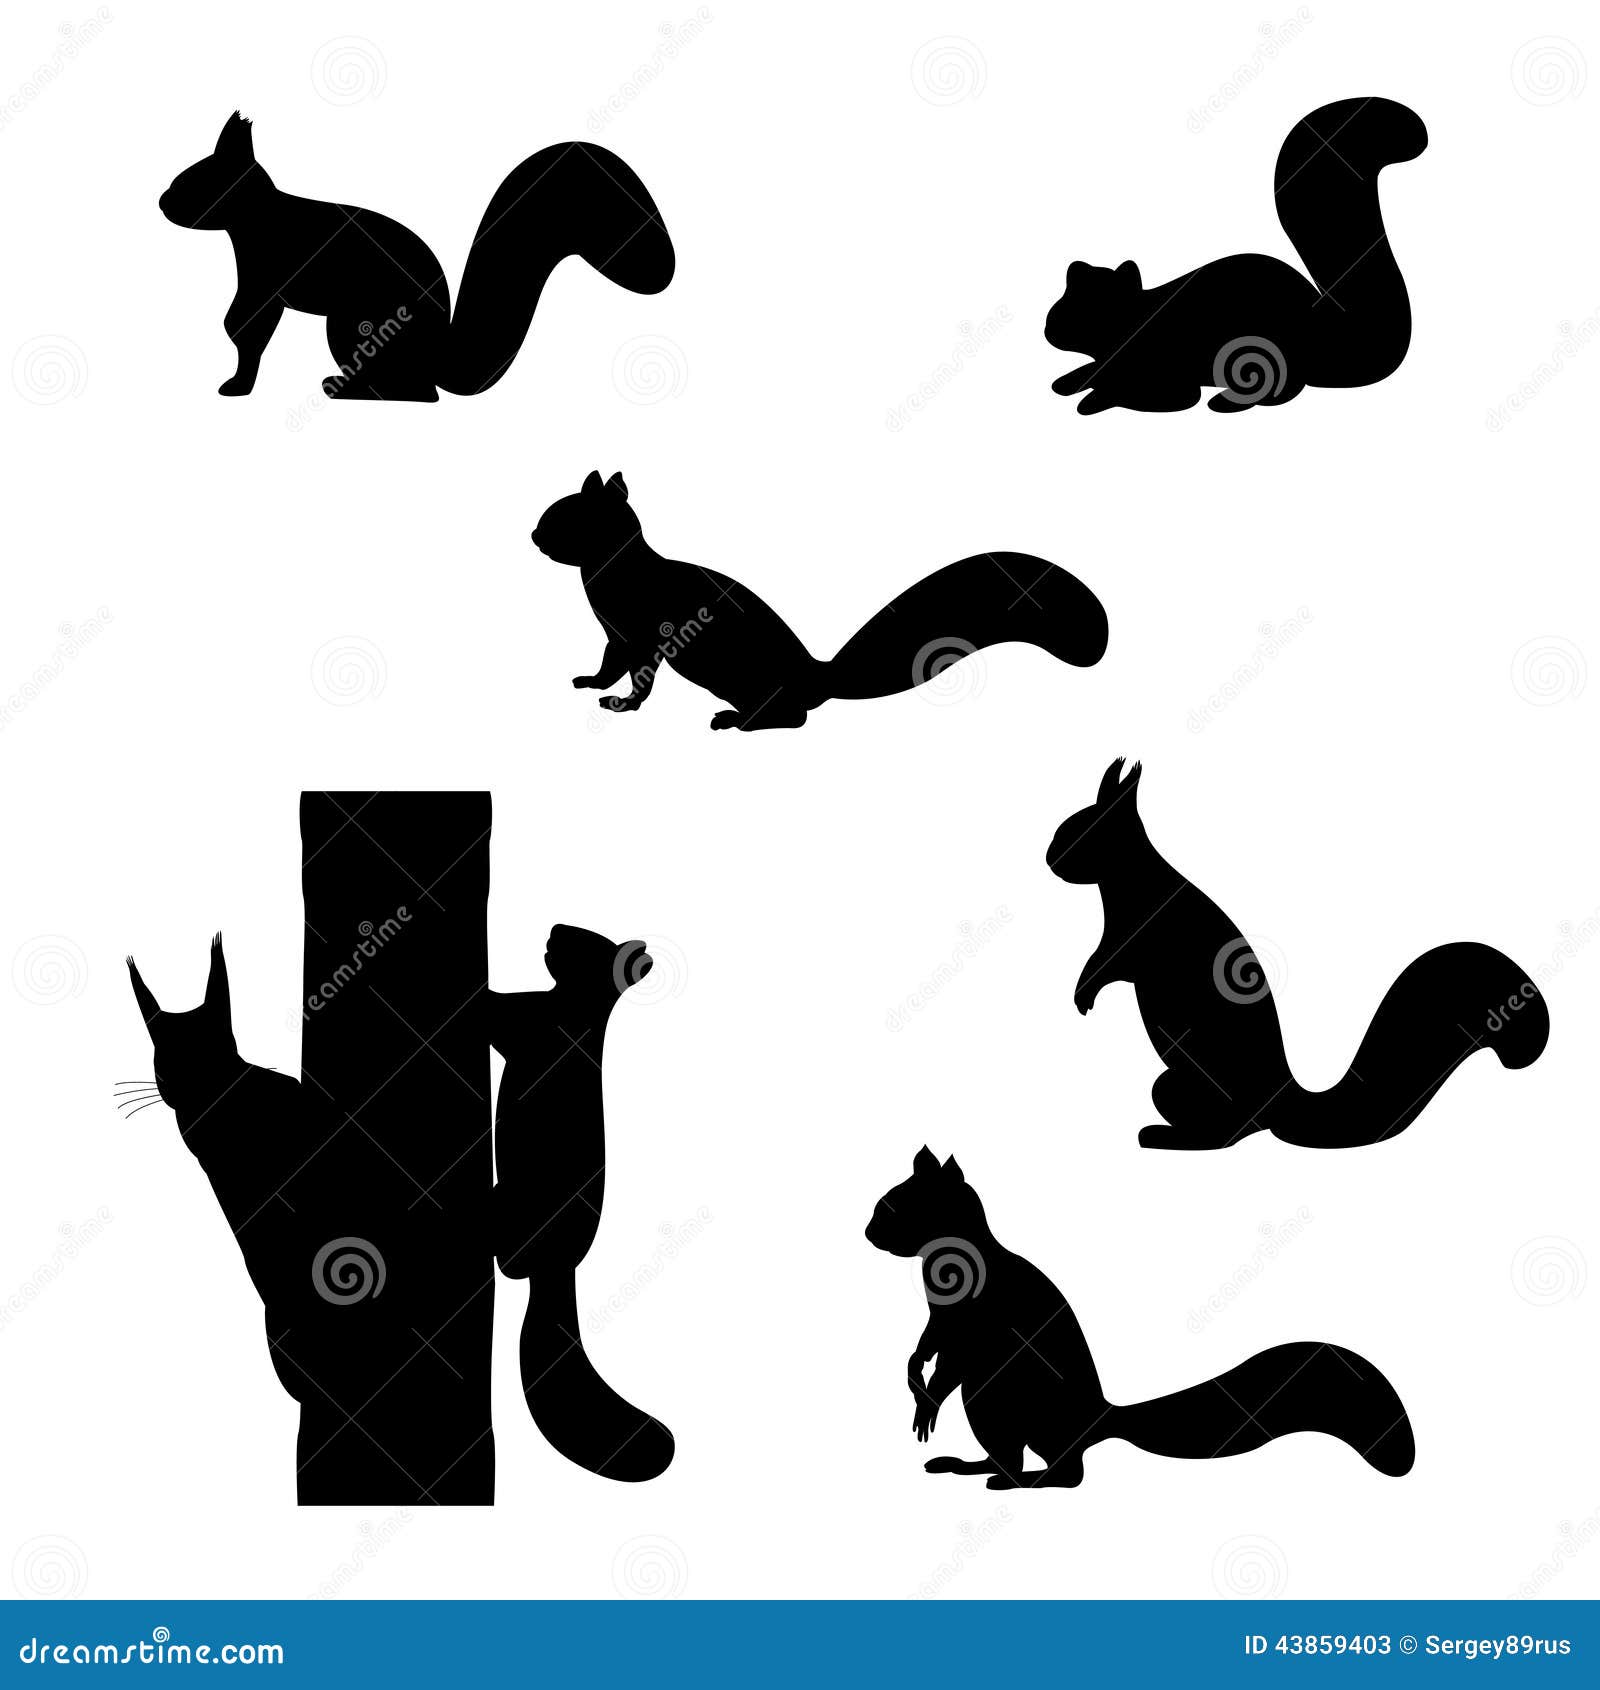 Download Set Of Silhouettes Of Squirrels. Stock Vector - Illustration of forest, black: 43859403